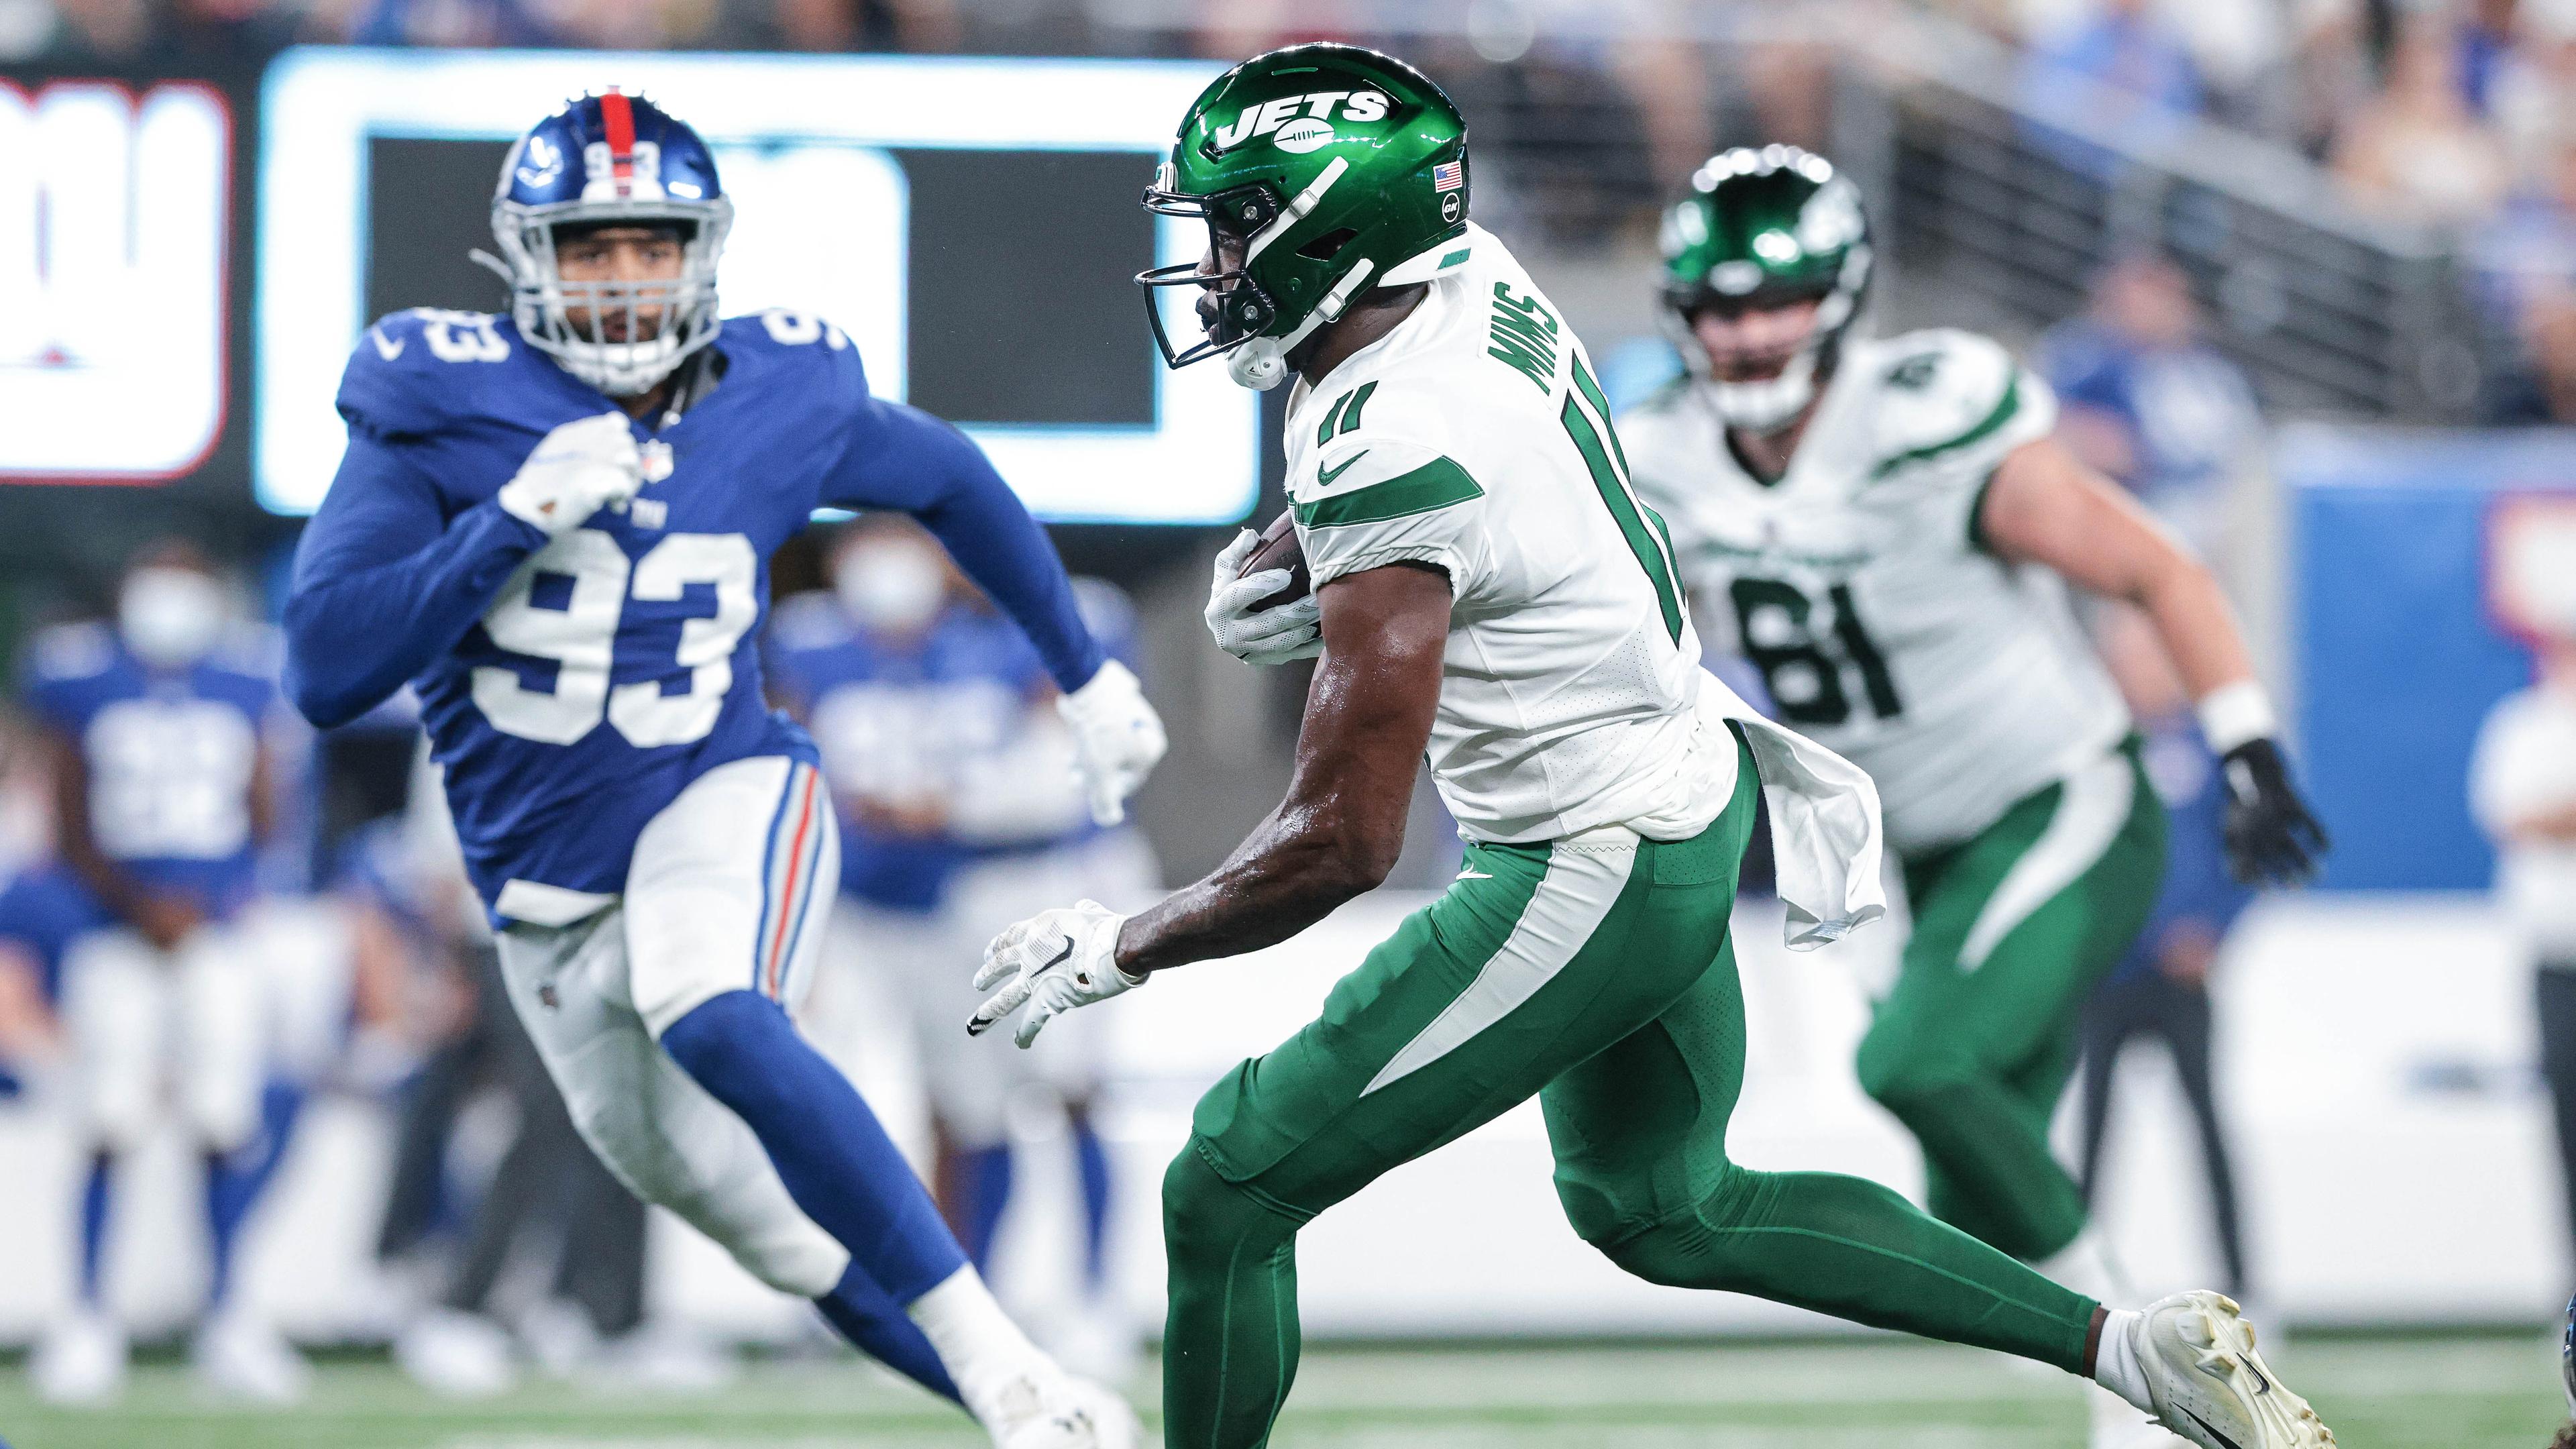 New York Jets wide receiver Denzel Mims (11) gains yards after a catch against New York Giants linebacker Trent Harris (93) during the second half at MetLife Stadium. / Vincent Carchietta-USA TODAY Sports